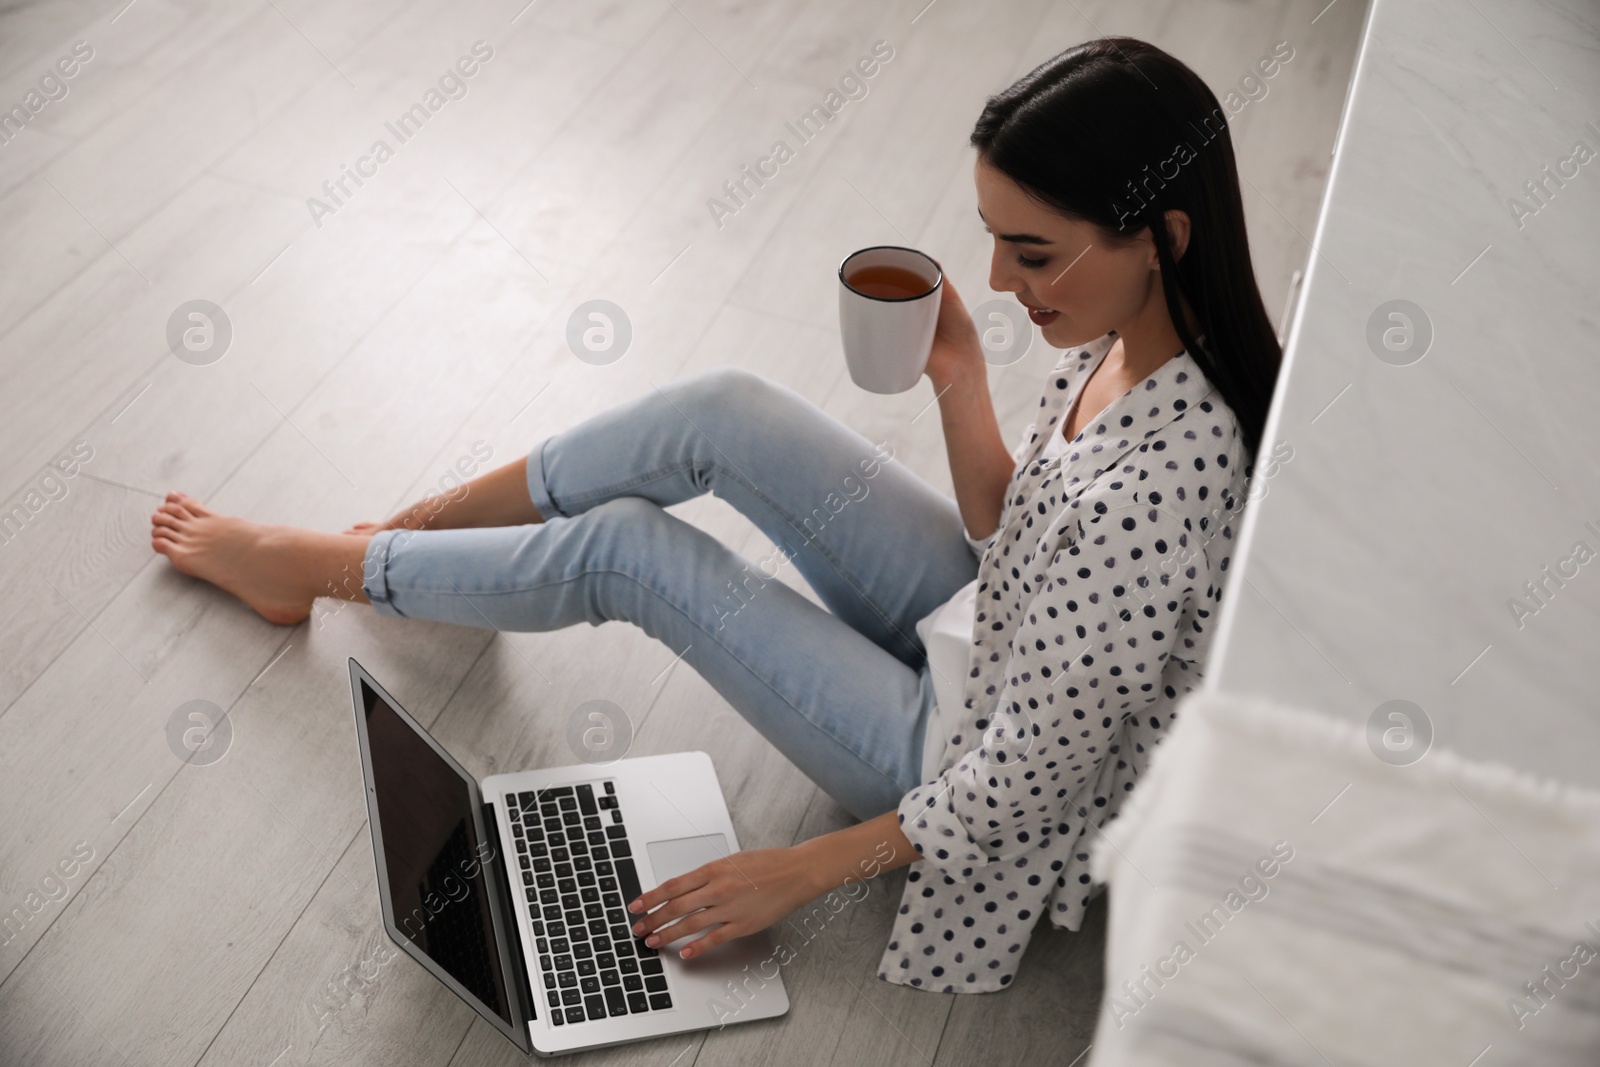 Photo of Happy woman with laptop and cup of drink sitting on warm floor indoors. Heating system